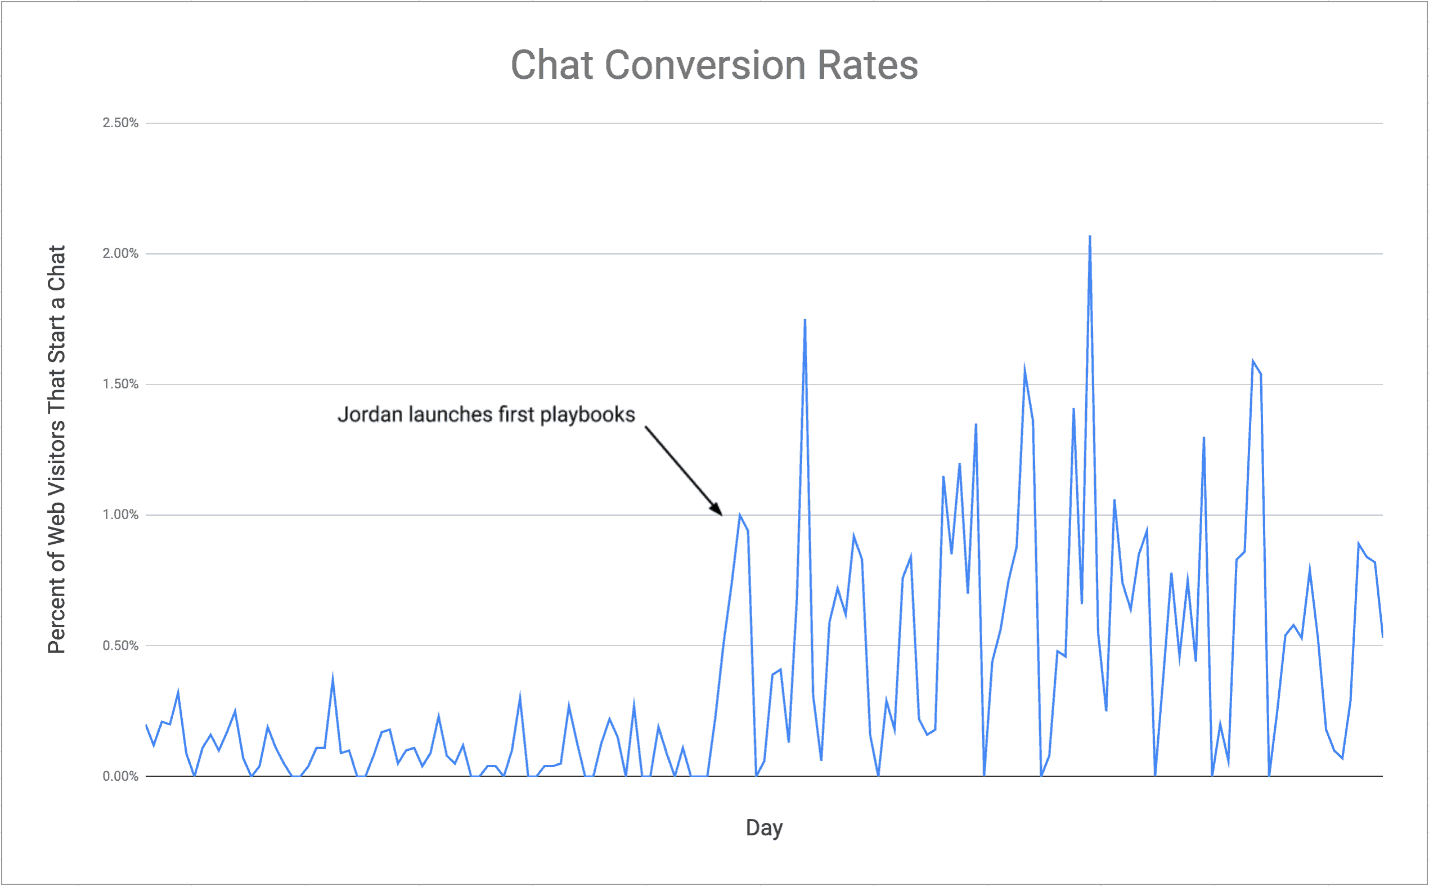 positive spikes and increase in conversion post personalization